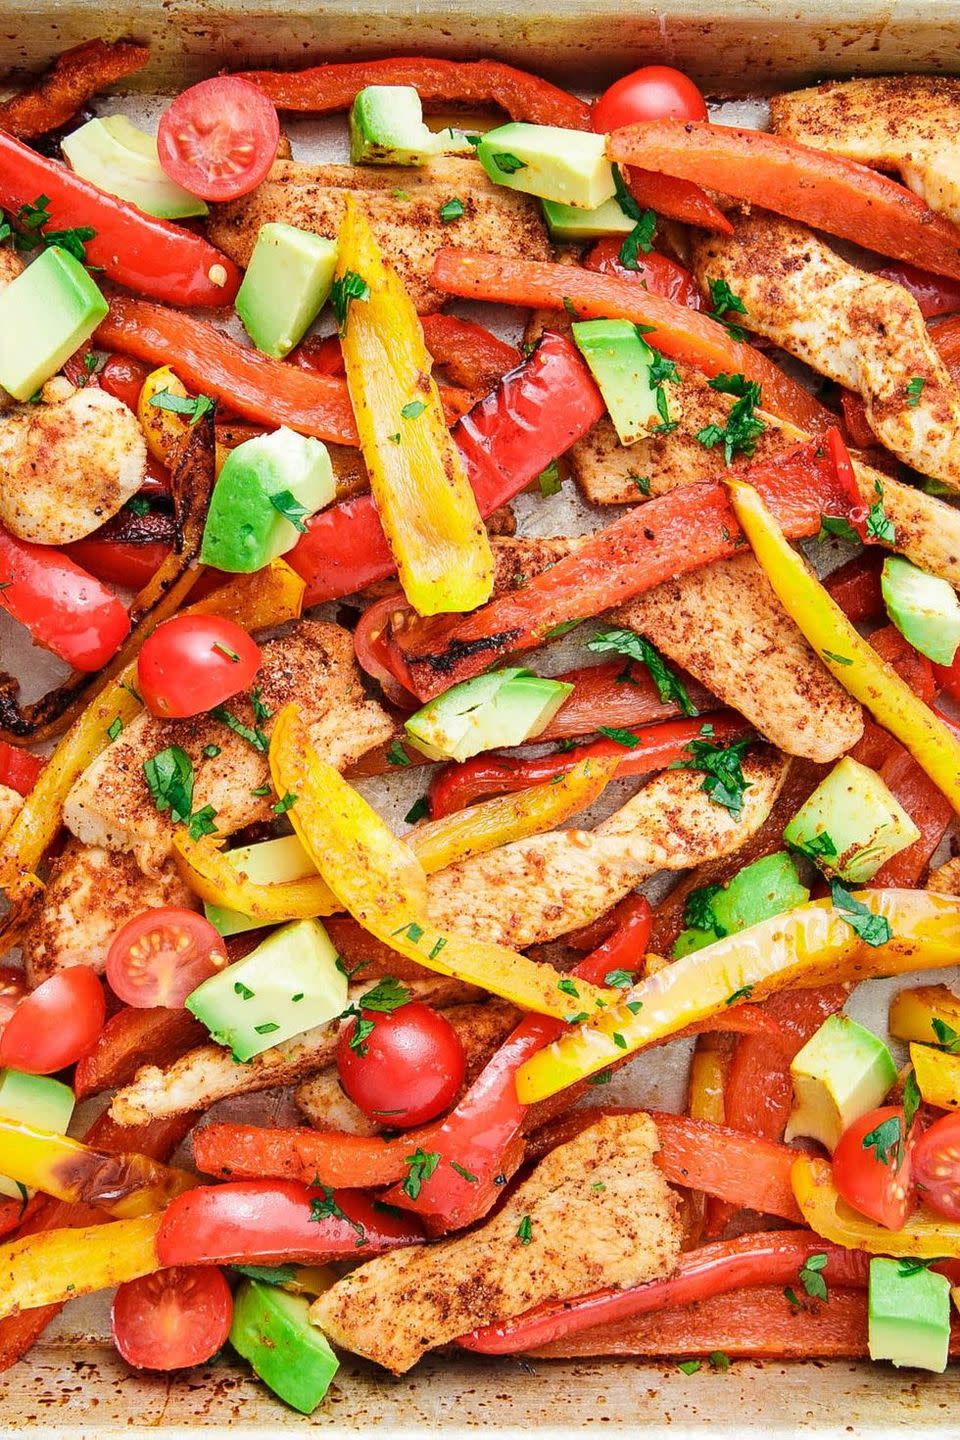 <p>Making a whole recipe on a single baking tray is perfect for meal prepping. For these fajitas you simply toss all of the ingredients—chicken and vegetables—in an easy marinade of avocado oil and taco spices like cumin and chilli powder and then bake it all together on a baking tray.</p><p>Get the <a href="https://www.delish.com/uk/cooking/recipes/a35332716/sheet-pan-chicken-fajitas-recipe/" rel="nofollow noopener" target="_blank" data-ylk="slk:One-Tray Fajitas" class="link ">One-Tray Fajitas</a> recipe.</p>